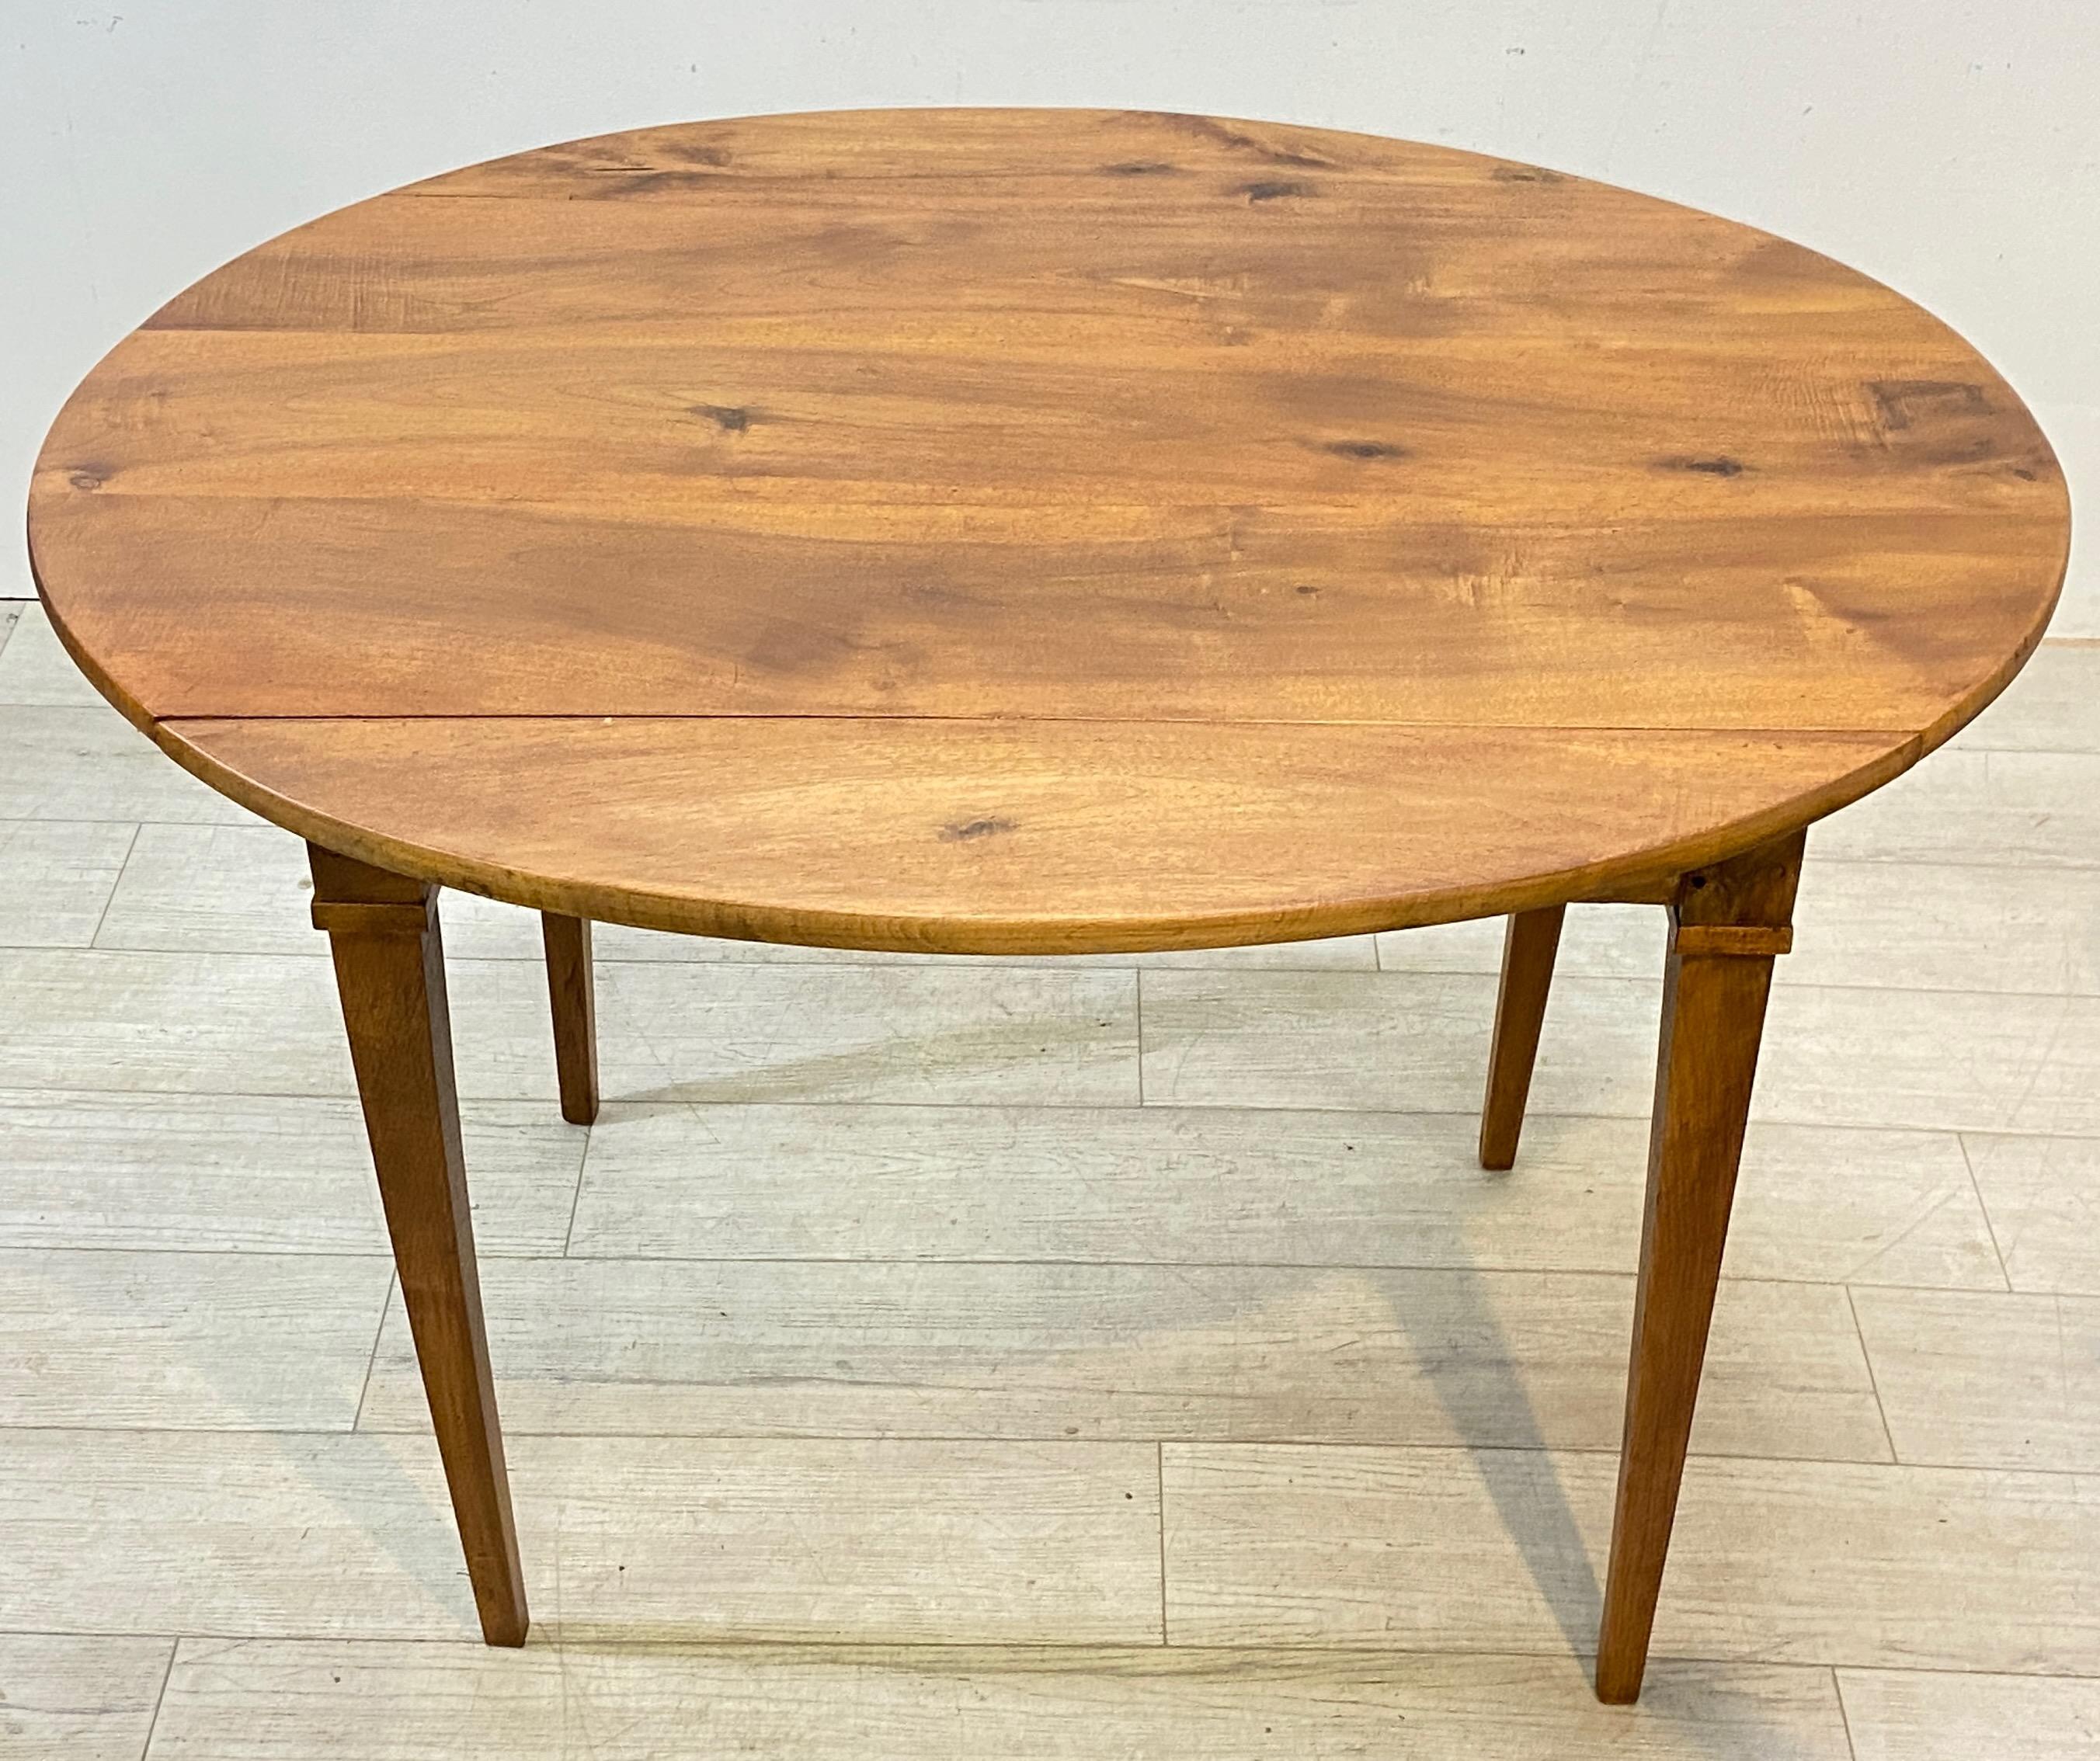 Early 19th C French Cherry Wood Elliptical Drop Leaf Dining Table, circa 1800 For Sale 3